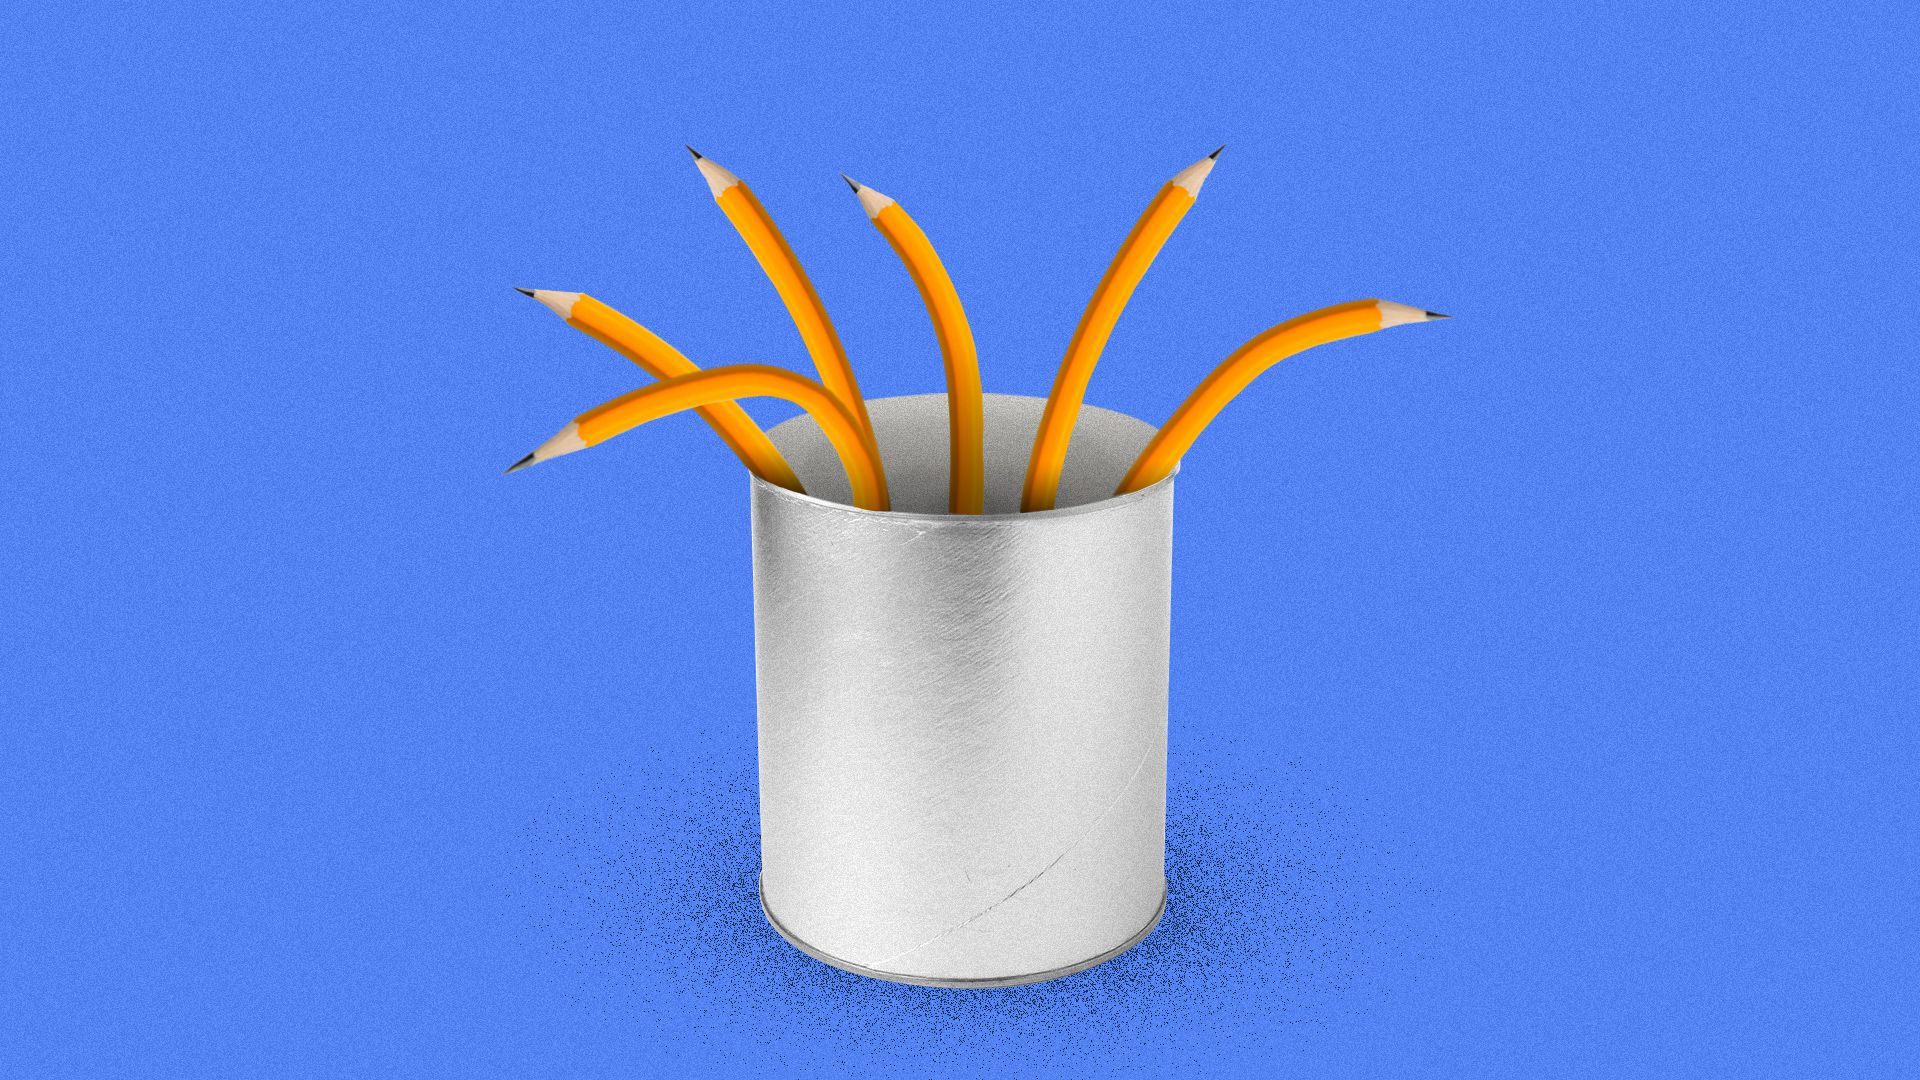 Illustration of drooping pencils in a cup. 